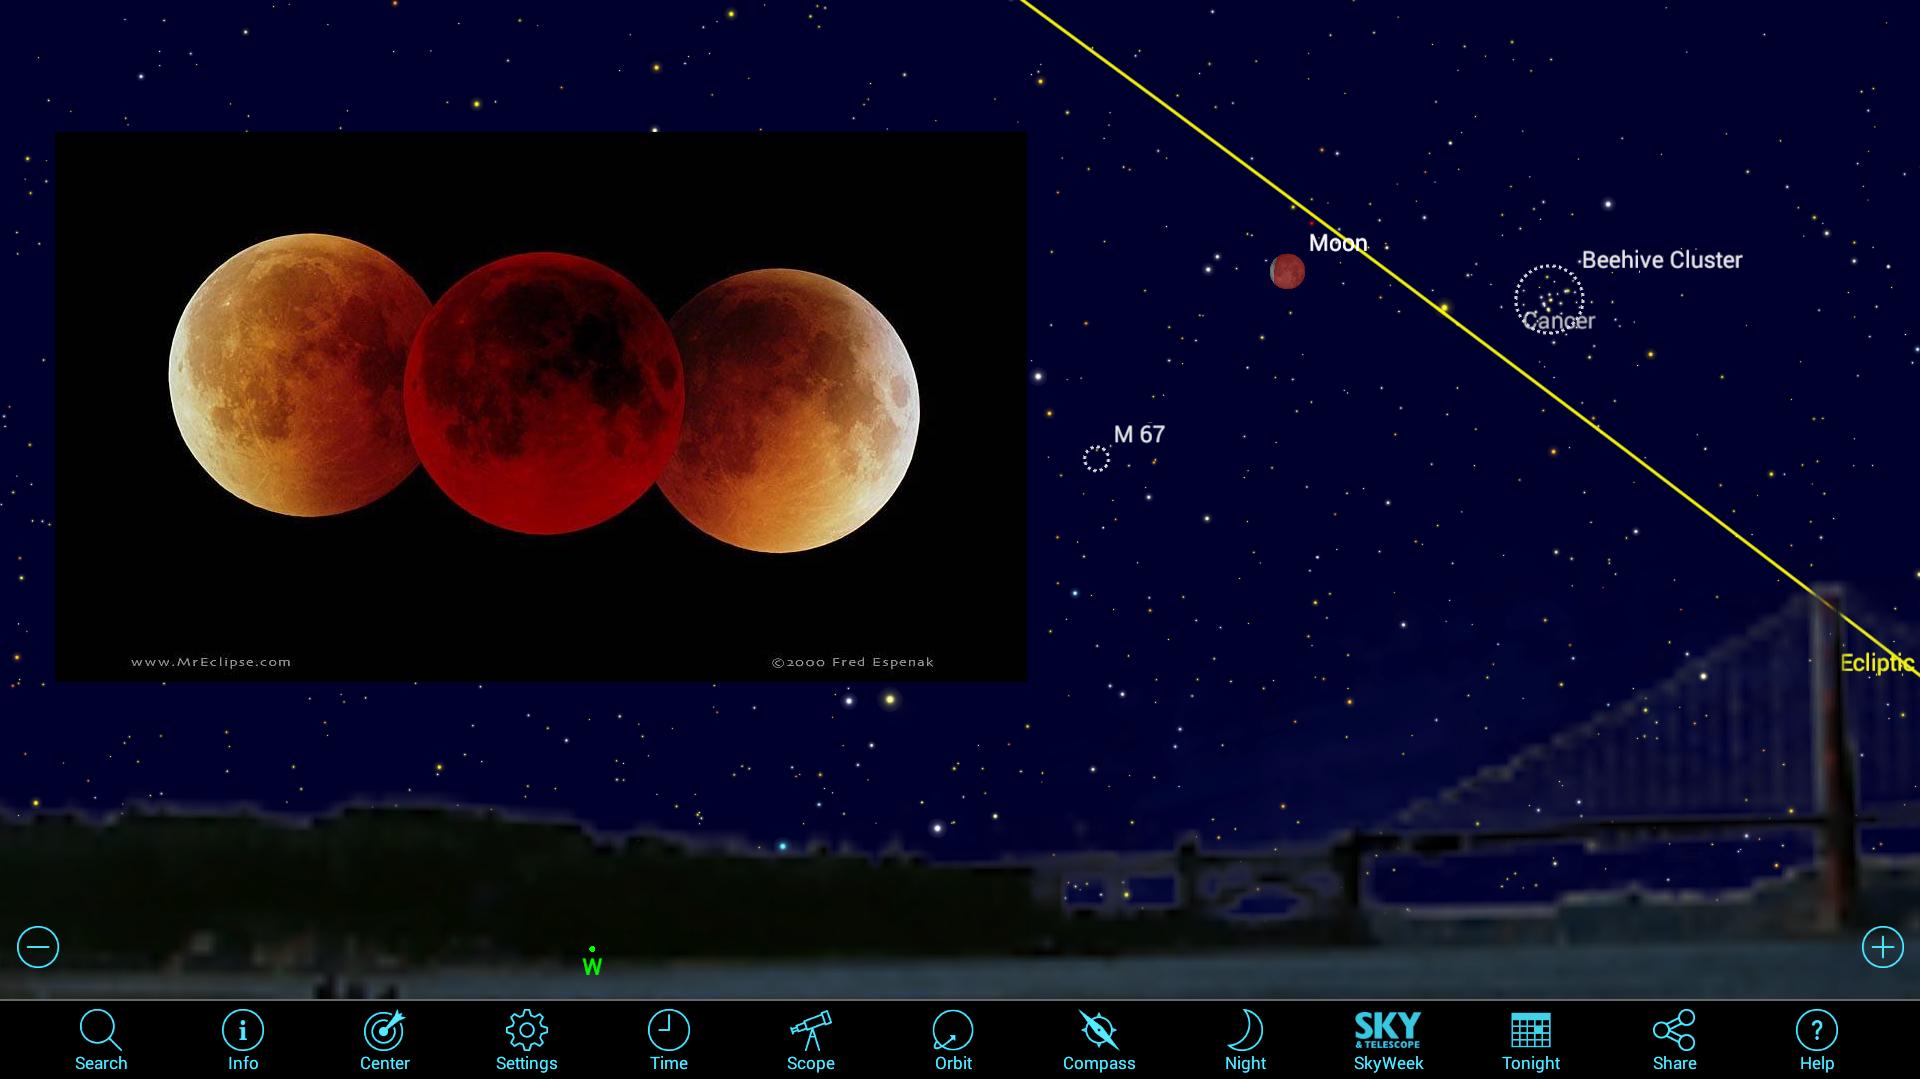 Super Blue Blood Moon Eclipse of January 2018 Using Mobile Apps | Space